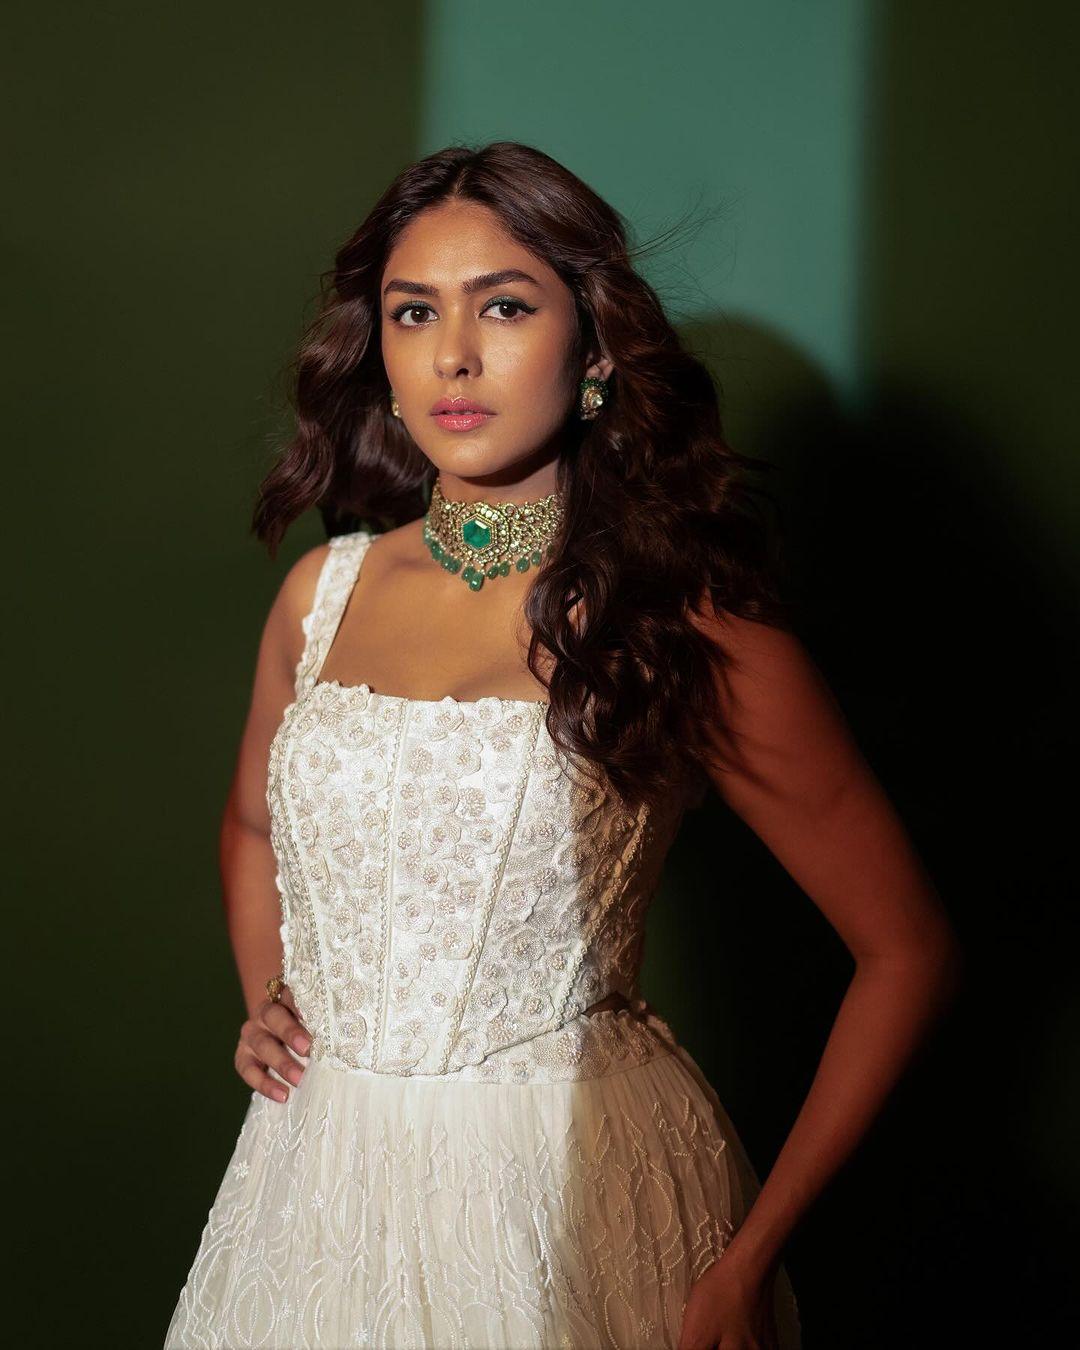 Mrunal accessorized her outfit with an intricate necklace and earrings featuring green gemstones, making a striking contrast